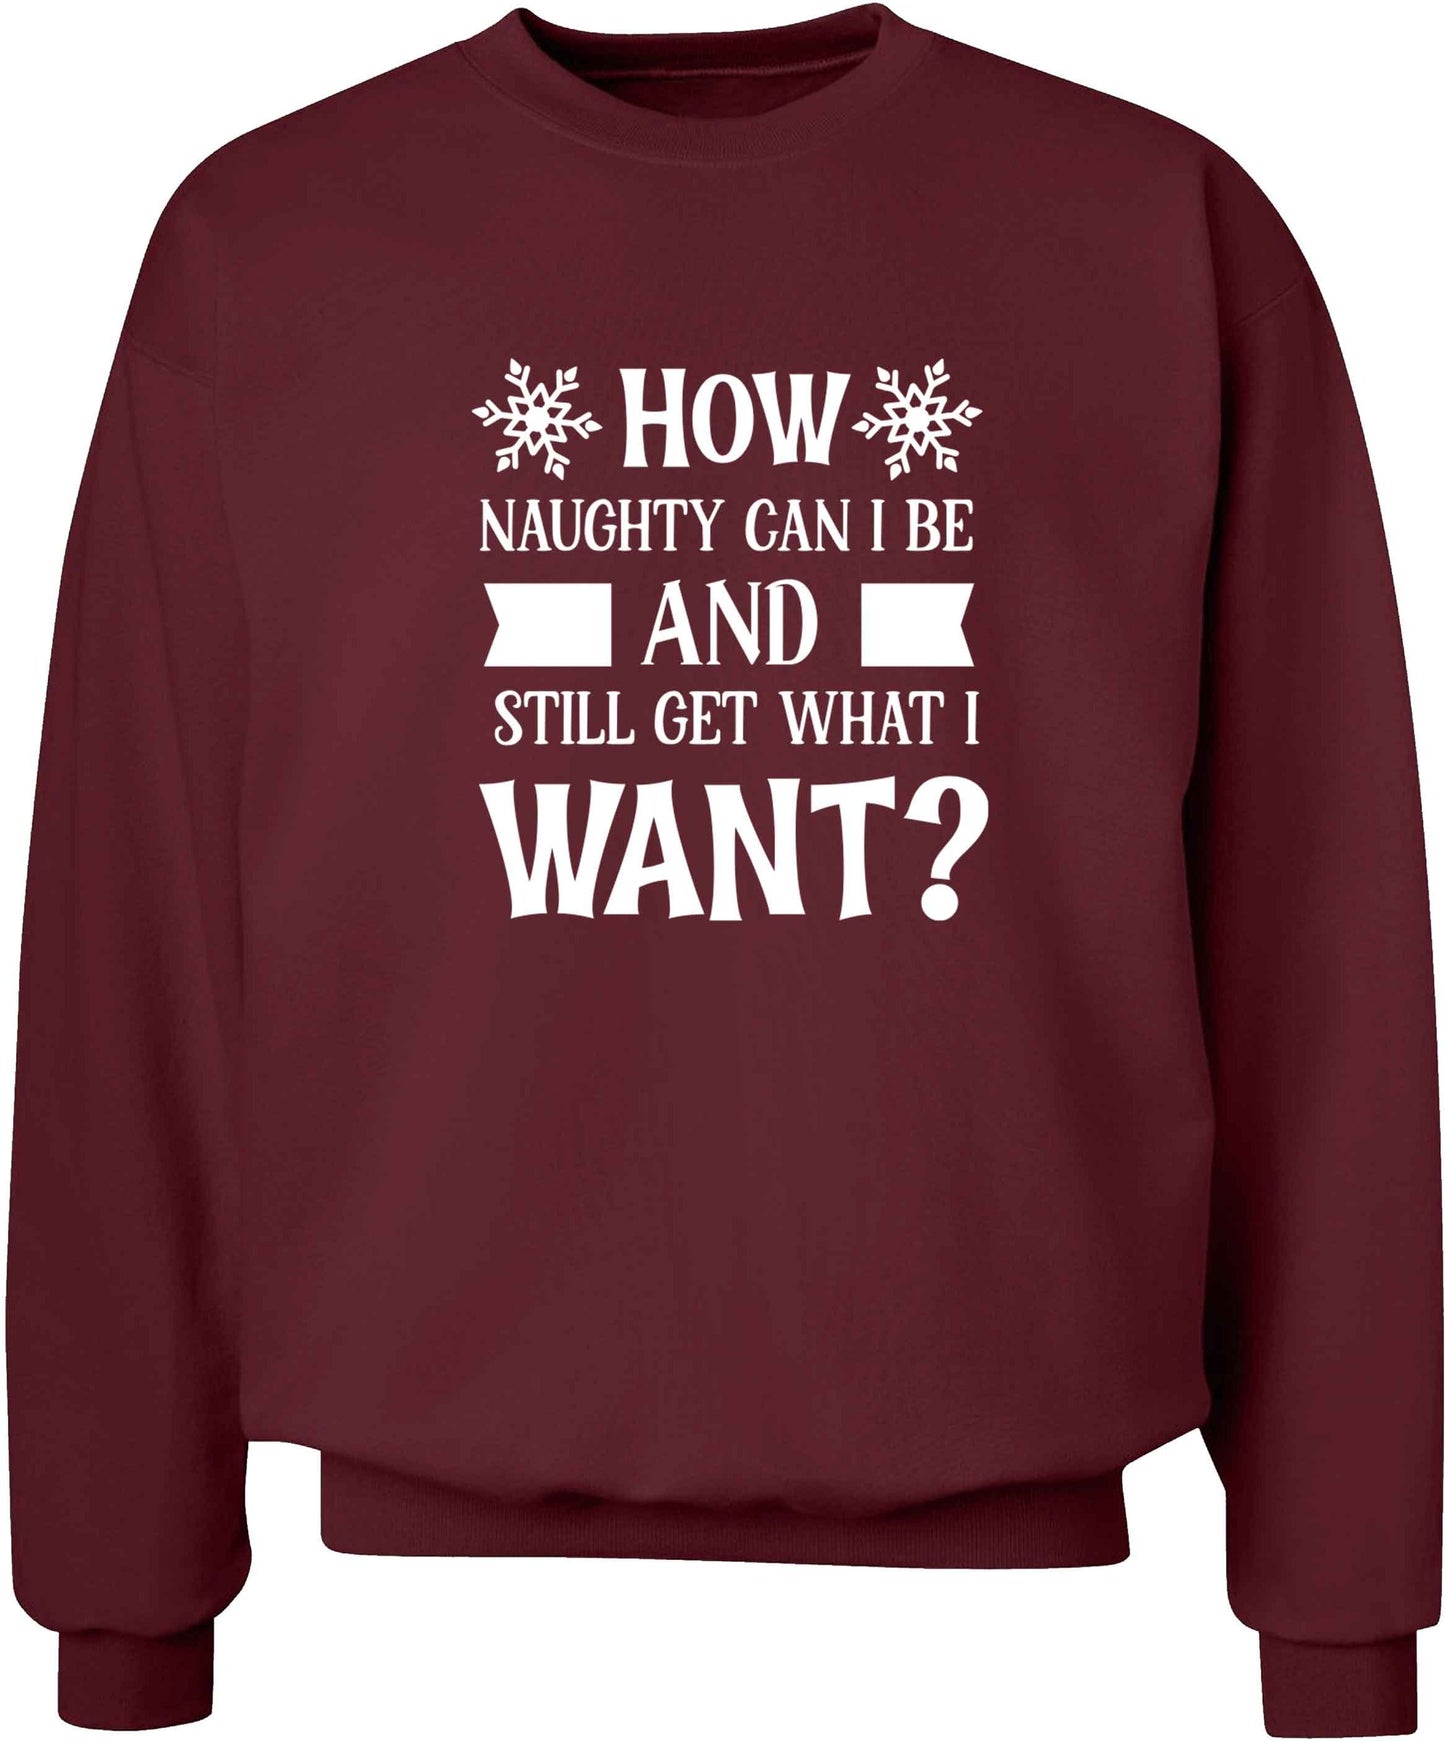 How naughty can I be and still get what I want? adult's unisex maroon sweater 2XL